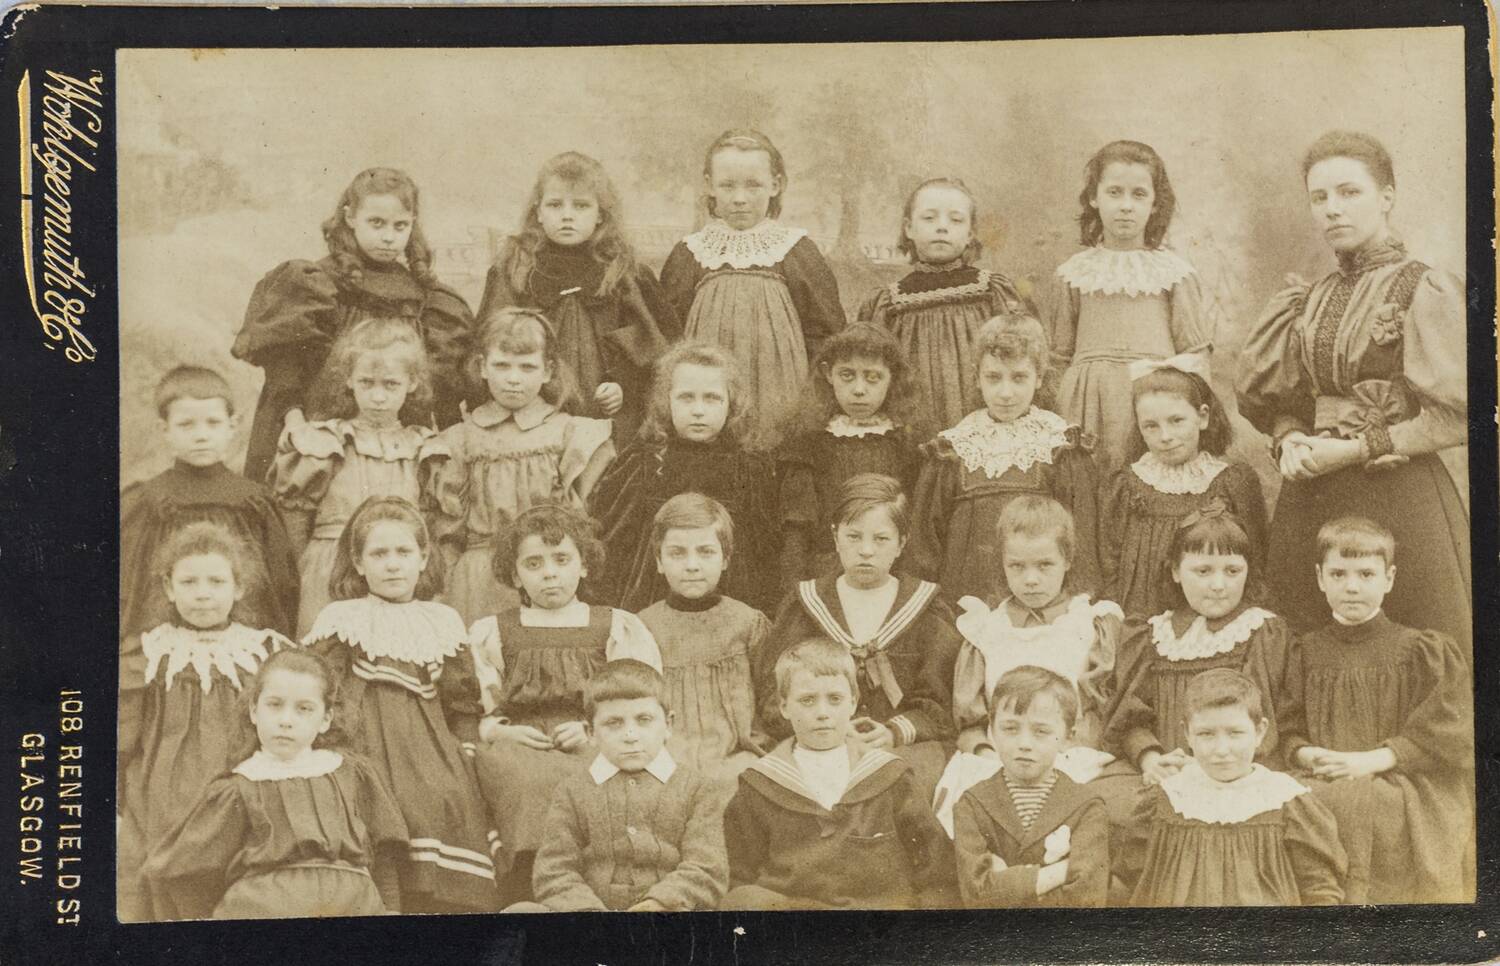 A sepia photograph of 4 rows of schoolchildren (girls and boys) with their teacher standing to the right. The children look to be aged around 7. Beside the photograph is a mount with the text: Wohlgemuth & Co, 108 Renfield St, Glasgow.